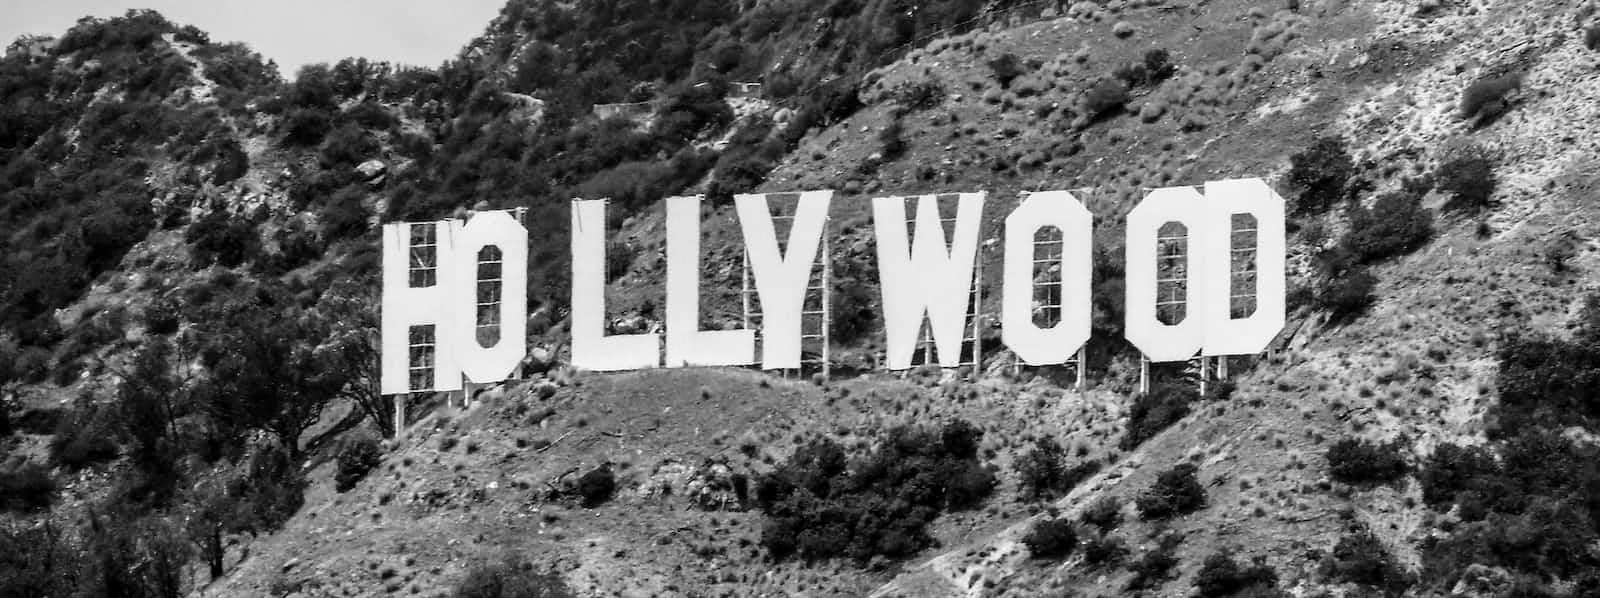 The Hollywood sign in black and white